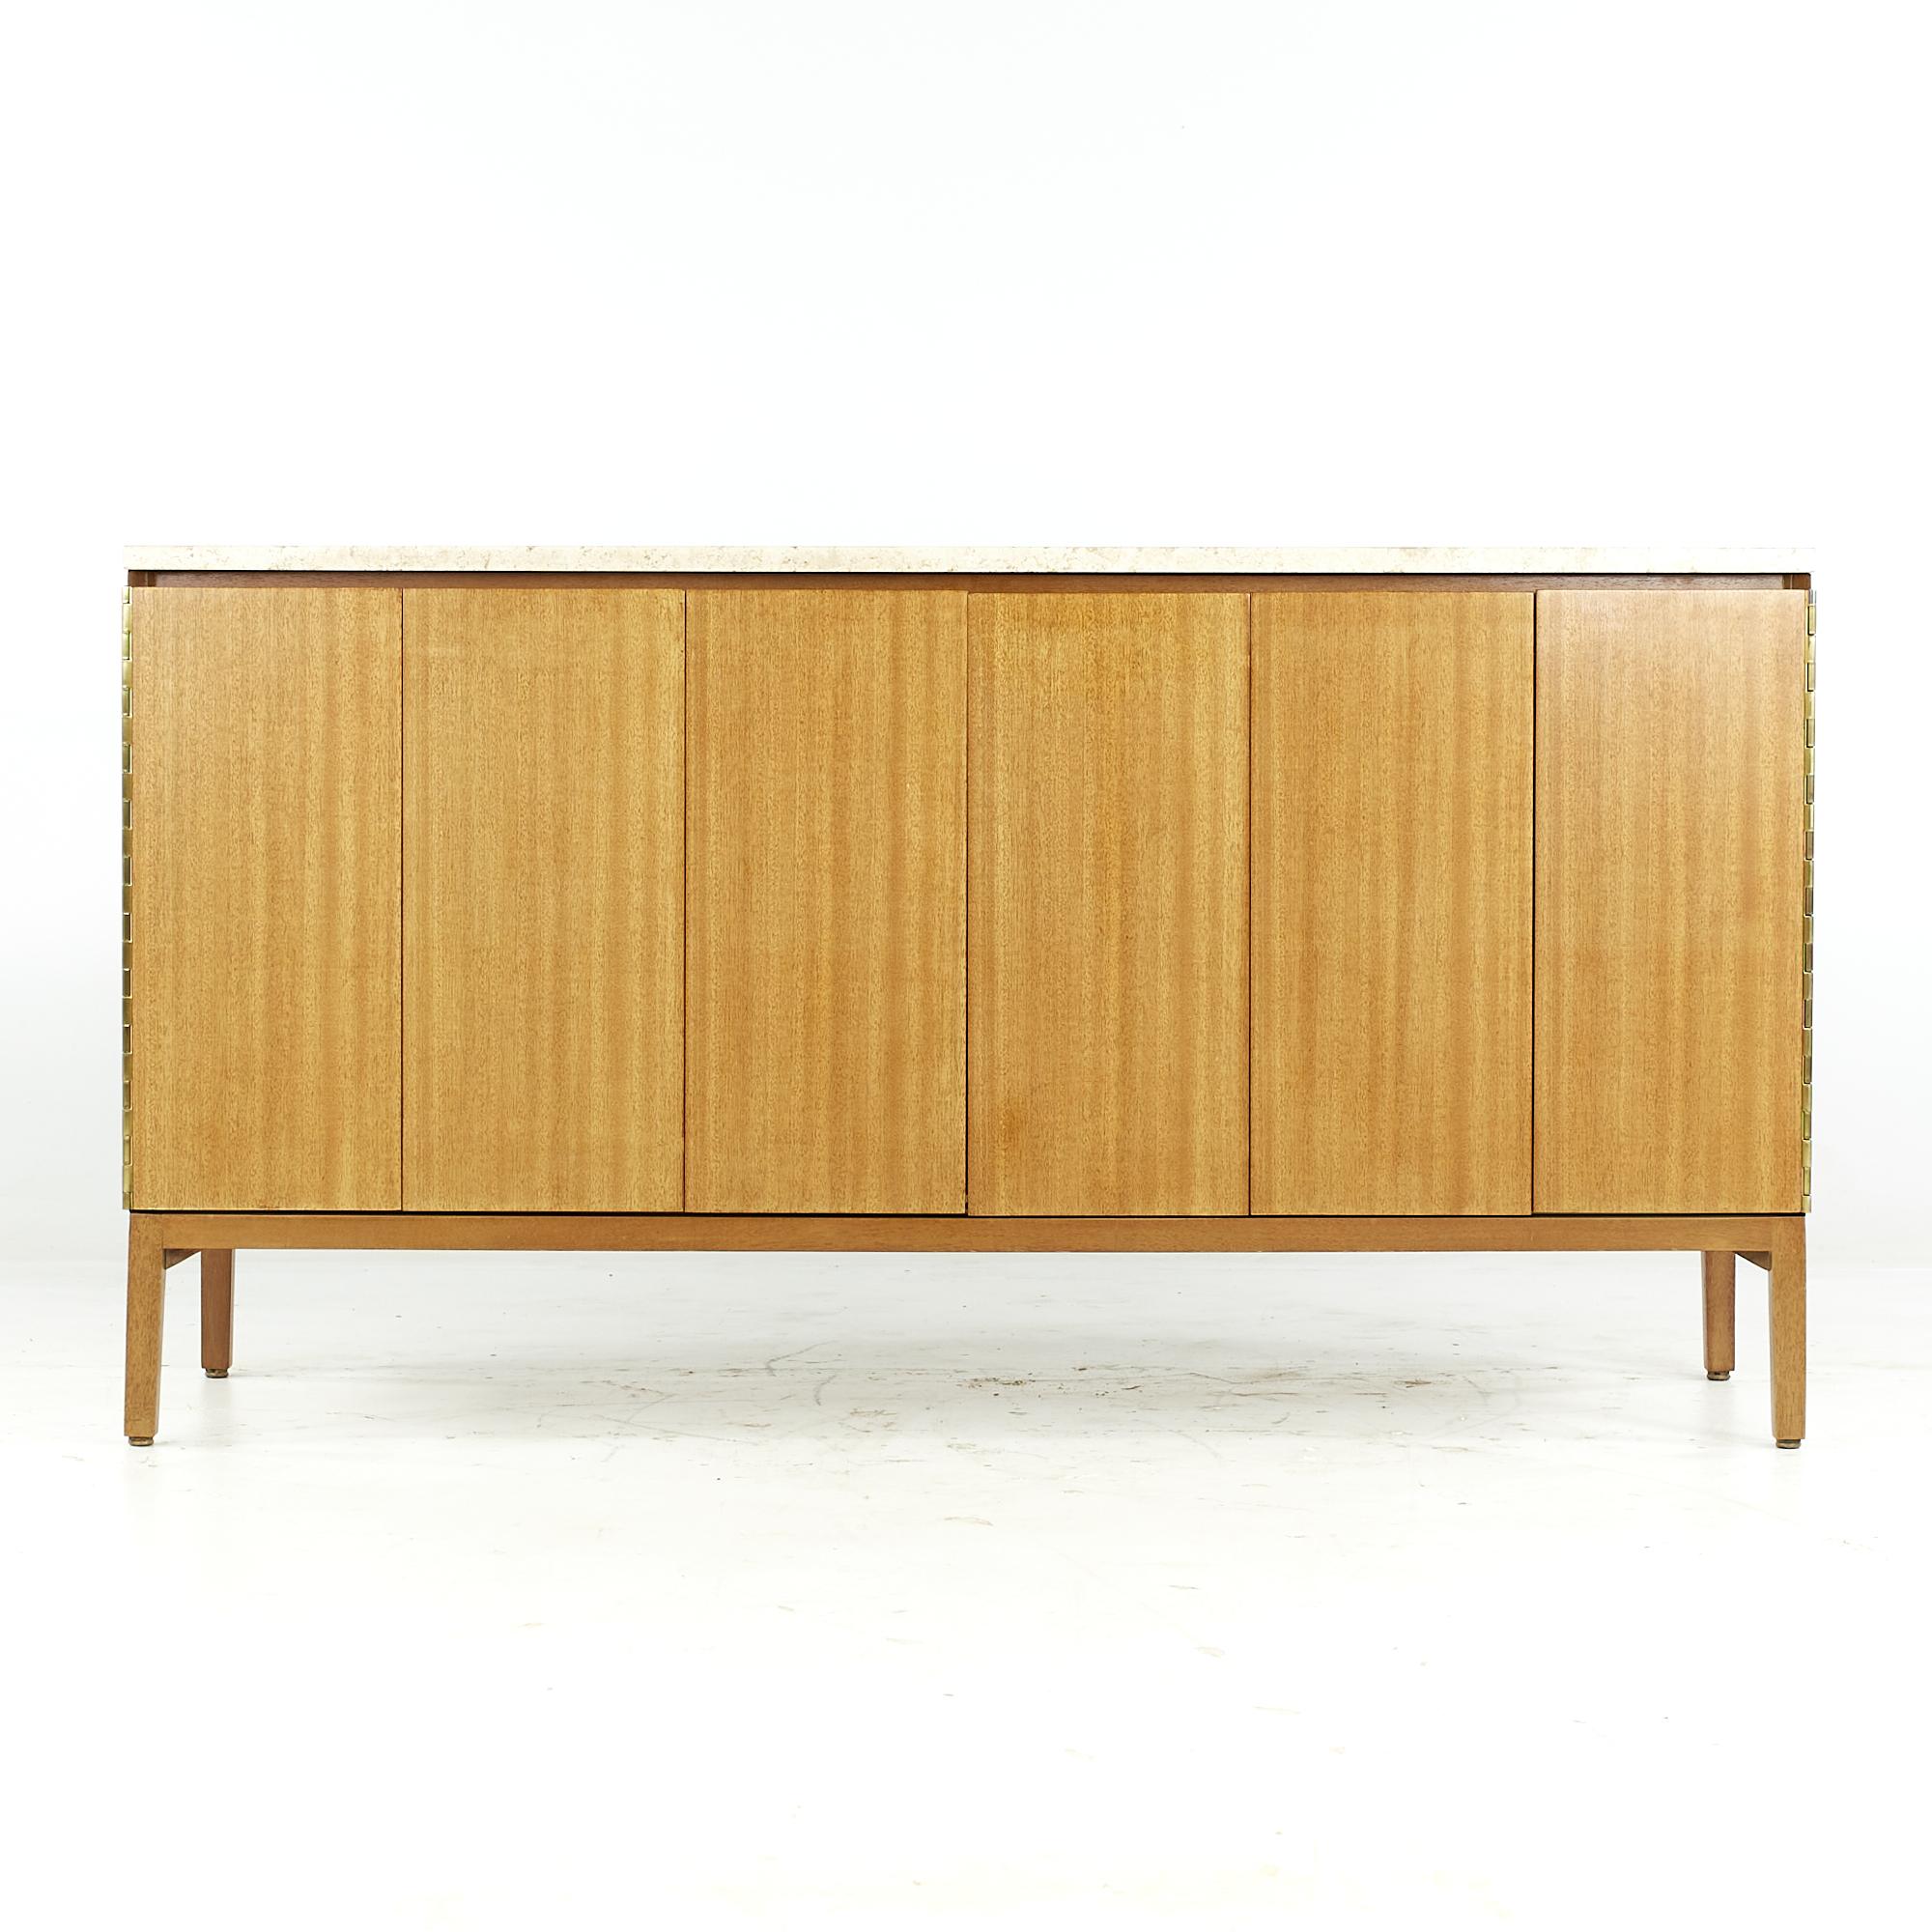 Paul McCobb for Calvin midcentury Mahogany and Travertine Top Credenza

This credenza measures: 60.25 wide x 19 deep x 32.25 inches high

All pieces of furniture can be had in what we call restored vintage condition. That means the piece is